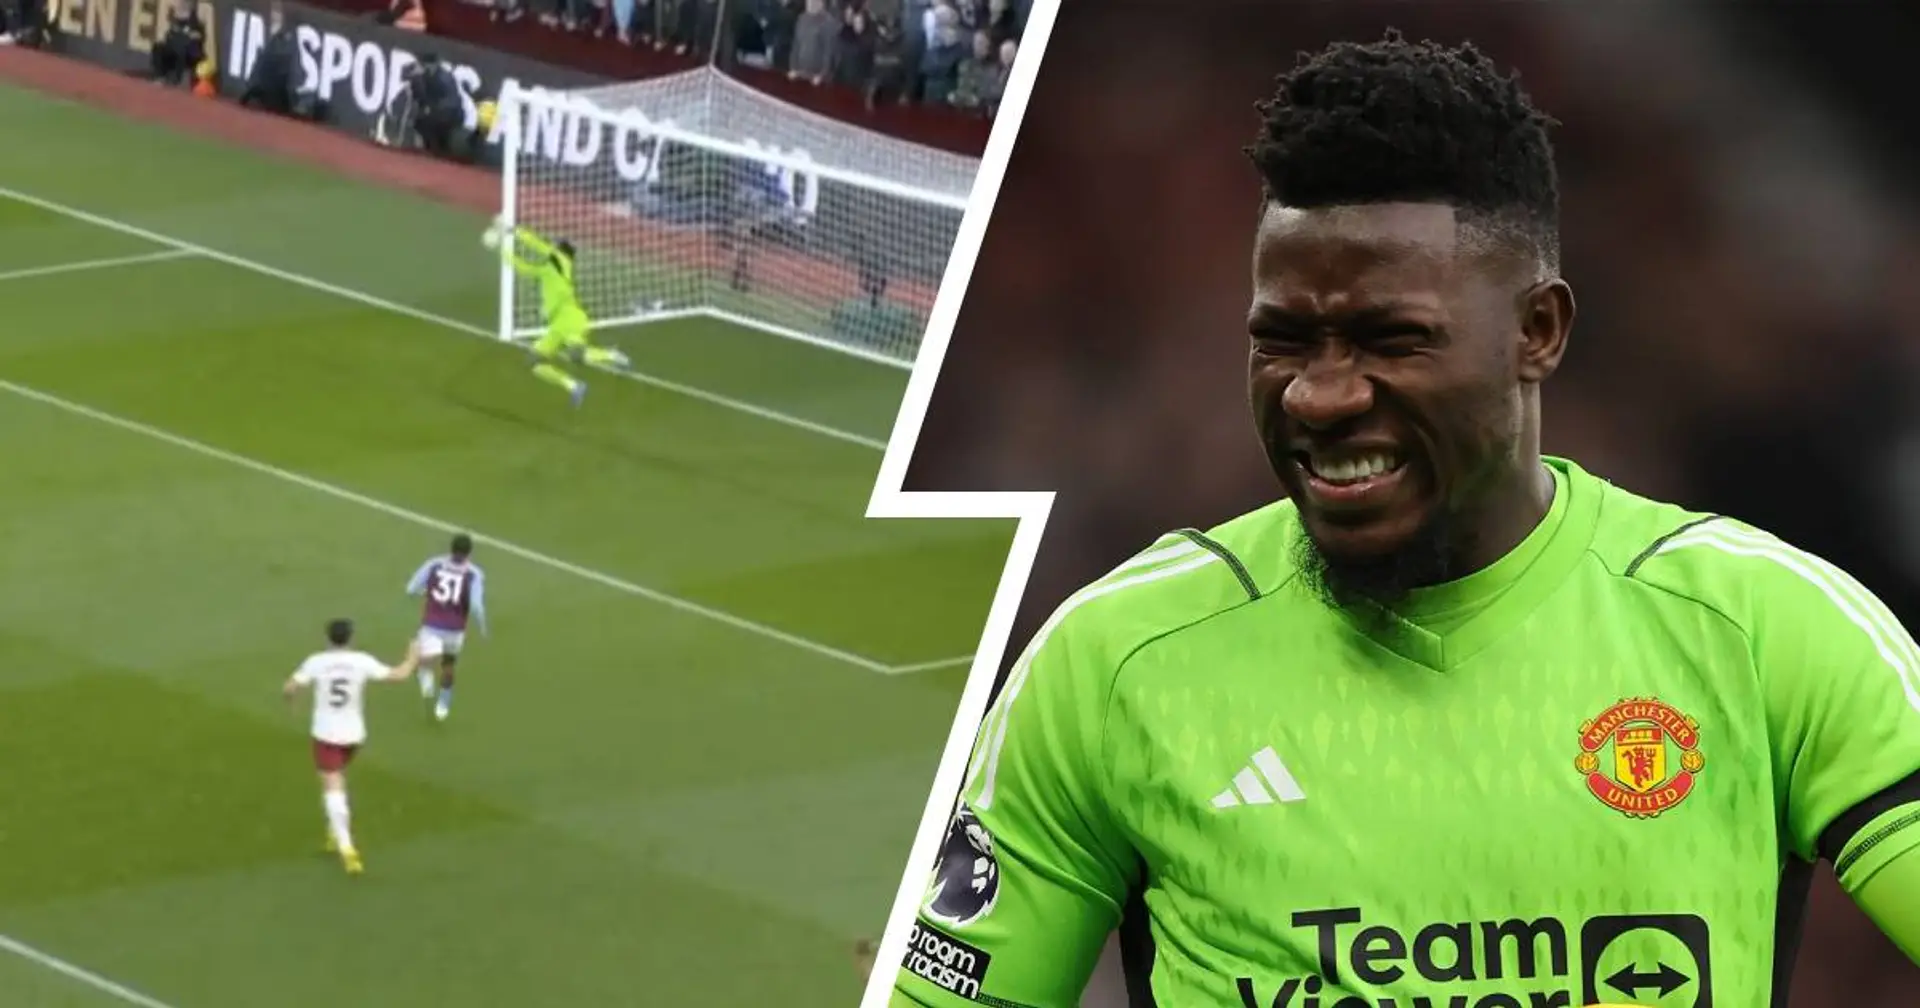 Man United don't get 3 points without him — Andre Onana's brilliance caught on camera